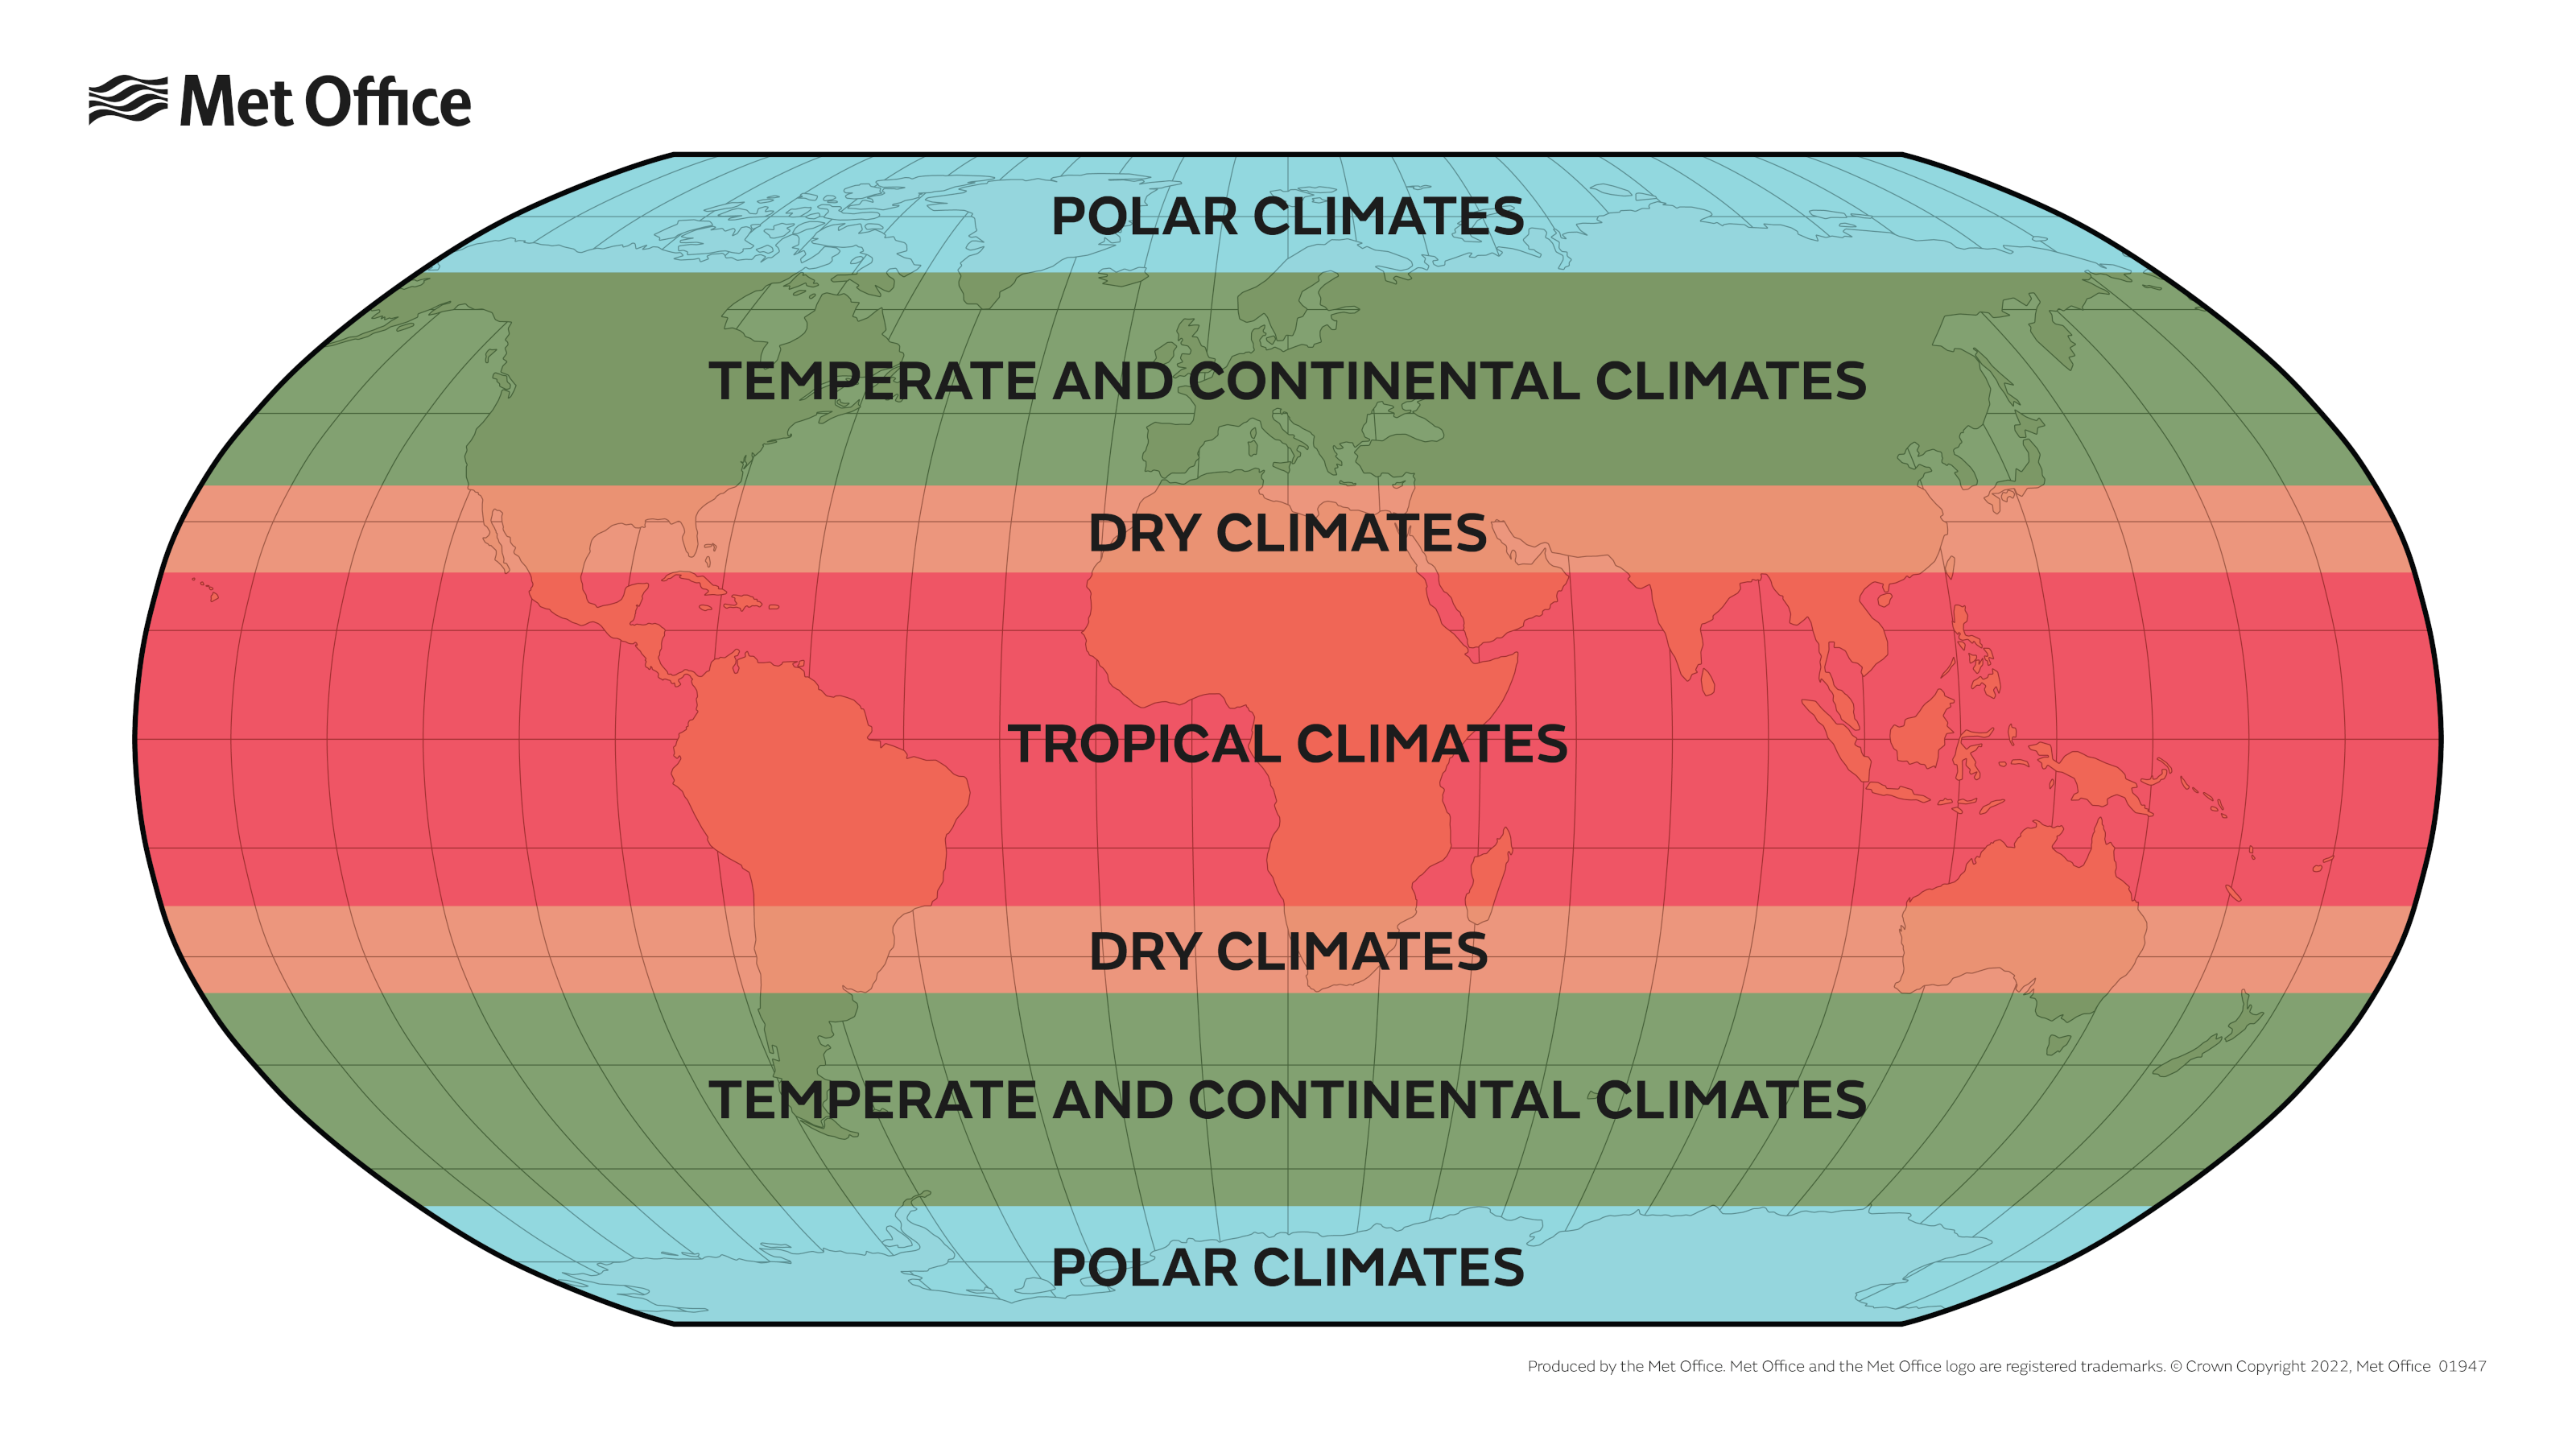 A simplified map of the world's climate zones, showing tropical climates at the equator, with dry, temperate and continental, and polar climates between the tropics and the poles.